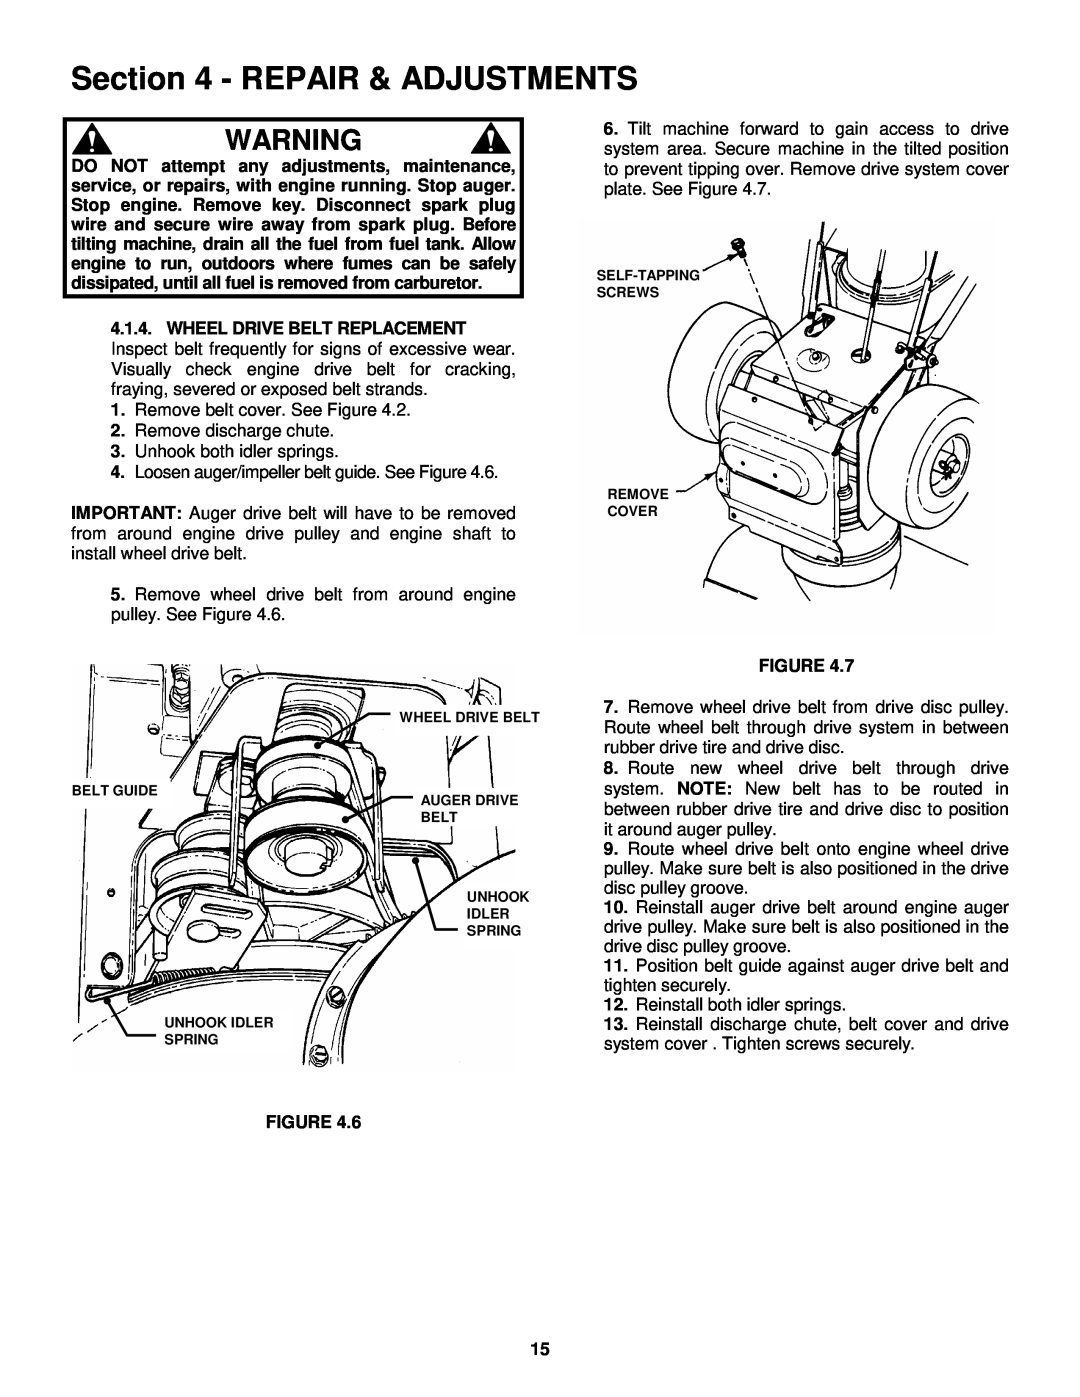 Snapper 8246, 9266E, 11306, 9266 important safety instructions Repair & Adjustments 